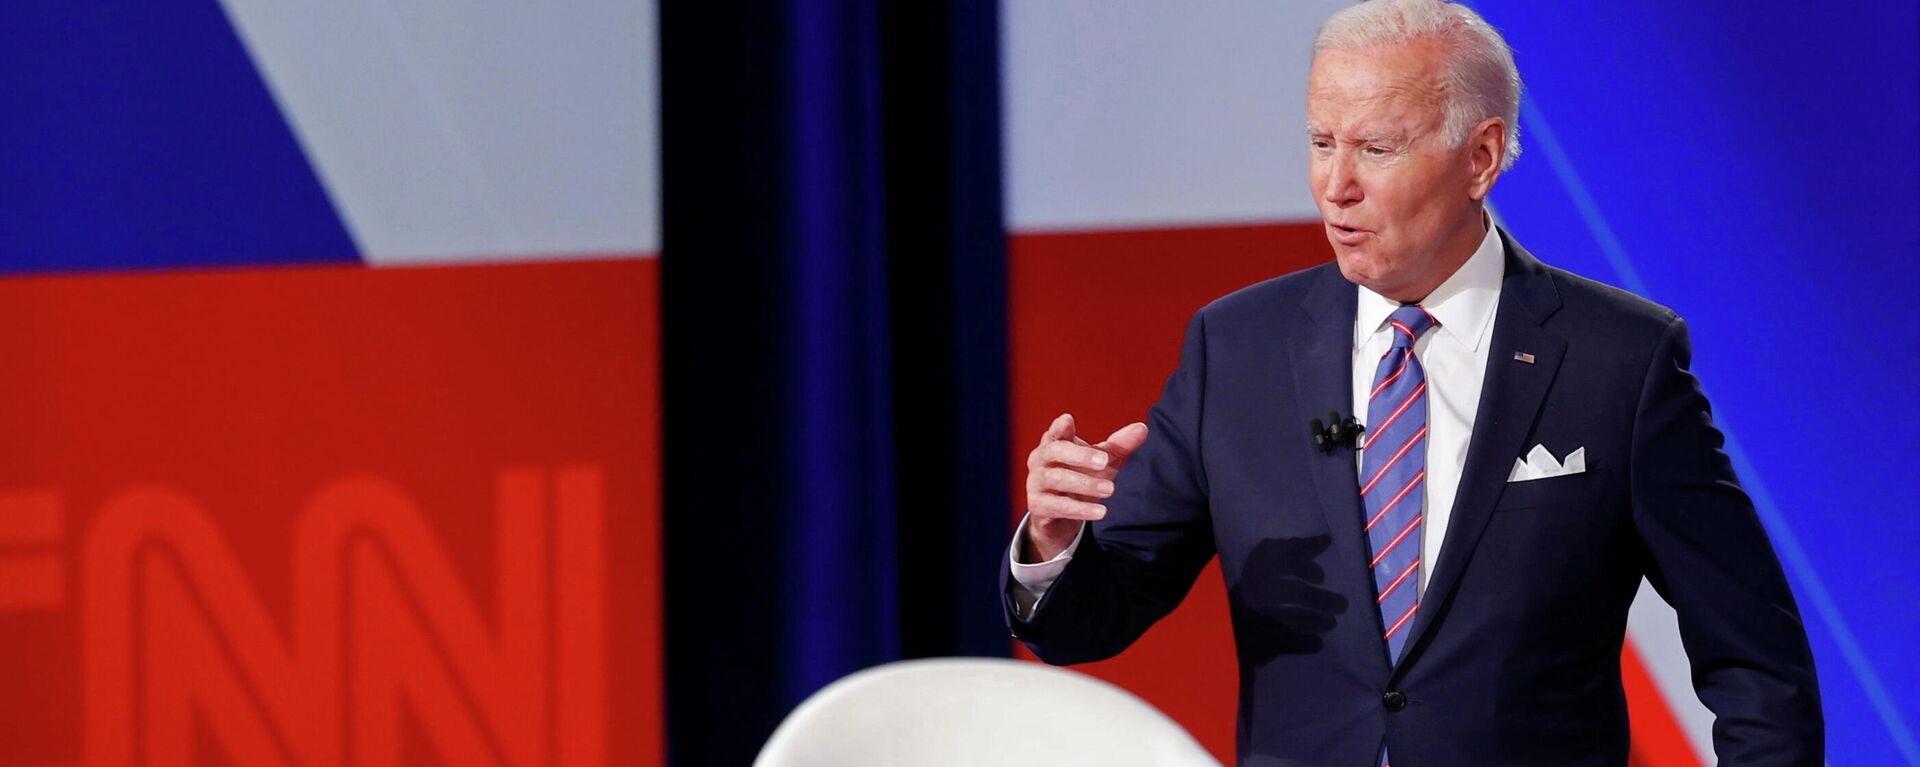 U.S. President Joe Biden speaks during a town hall about his infrastructure investment proposals with CNN's Anderson Cooper at the Baltimore Center Stage Pearlstone Theater in Baltimore, Maryland, U.S. October 21, 2021 - Sputnik International, 1920, 22.10.2021